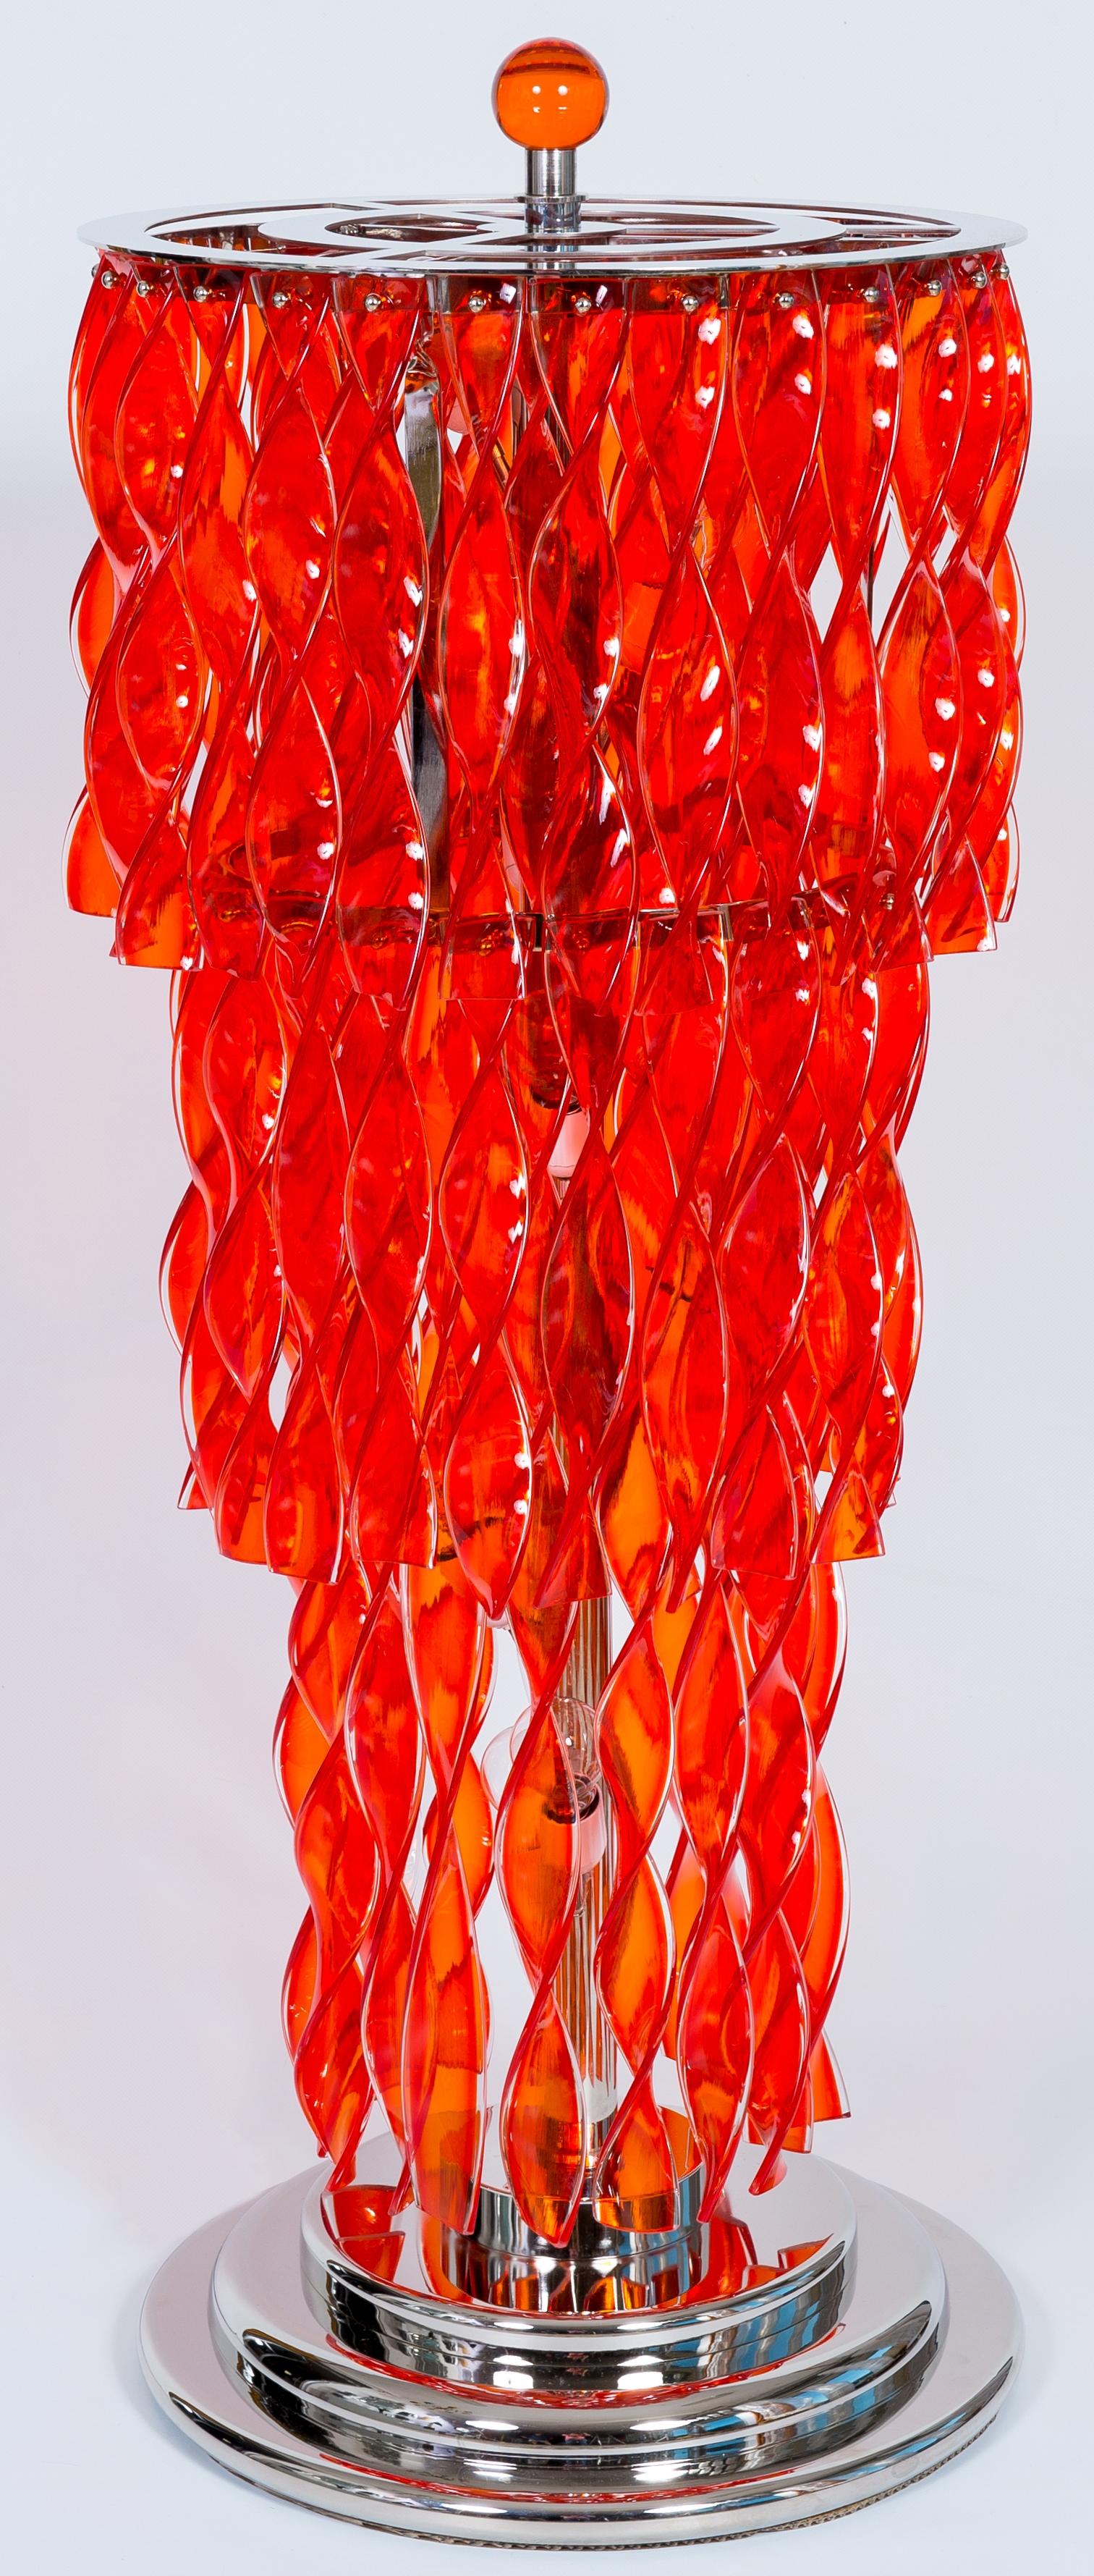 Fantastic, Limited Edition,Red Floor Lamp in Blown Murano Glass twisted strings, Giovanni Dalla Fina 21st
This is an amazing portrait entirely handcrafted in blown Murano glass, in the Venetian Murano Island. 
This is a unique Italian Venetian,